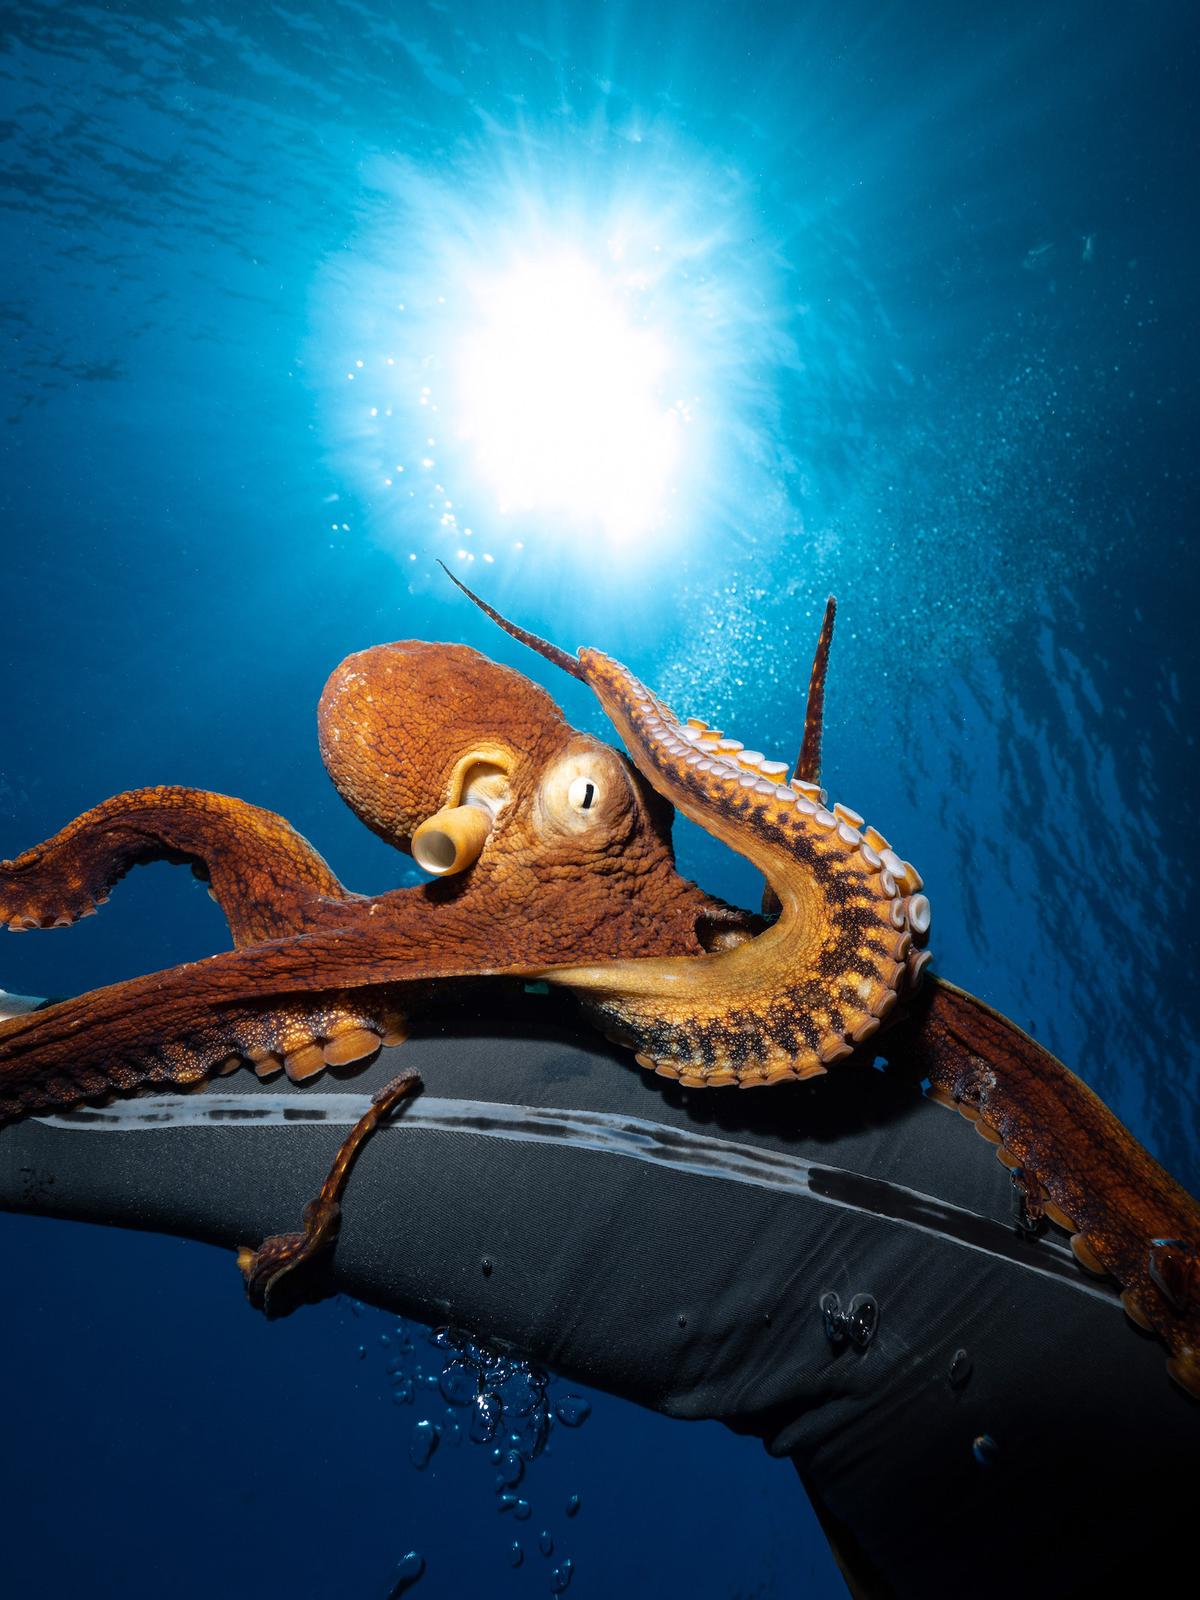 An octopus grabs Caleb's arm. (Caters News)